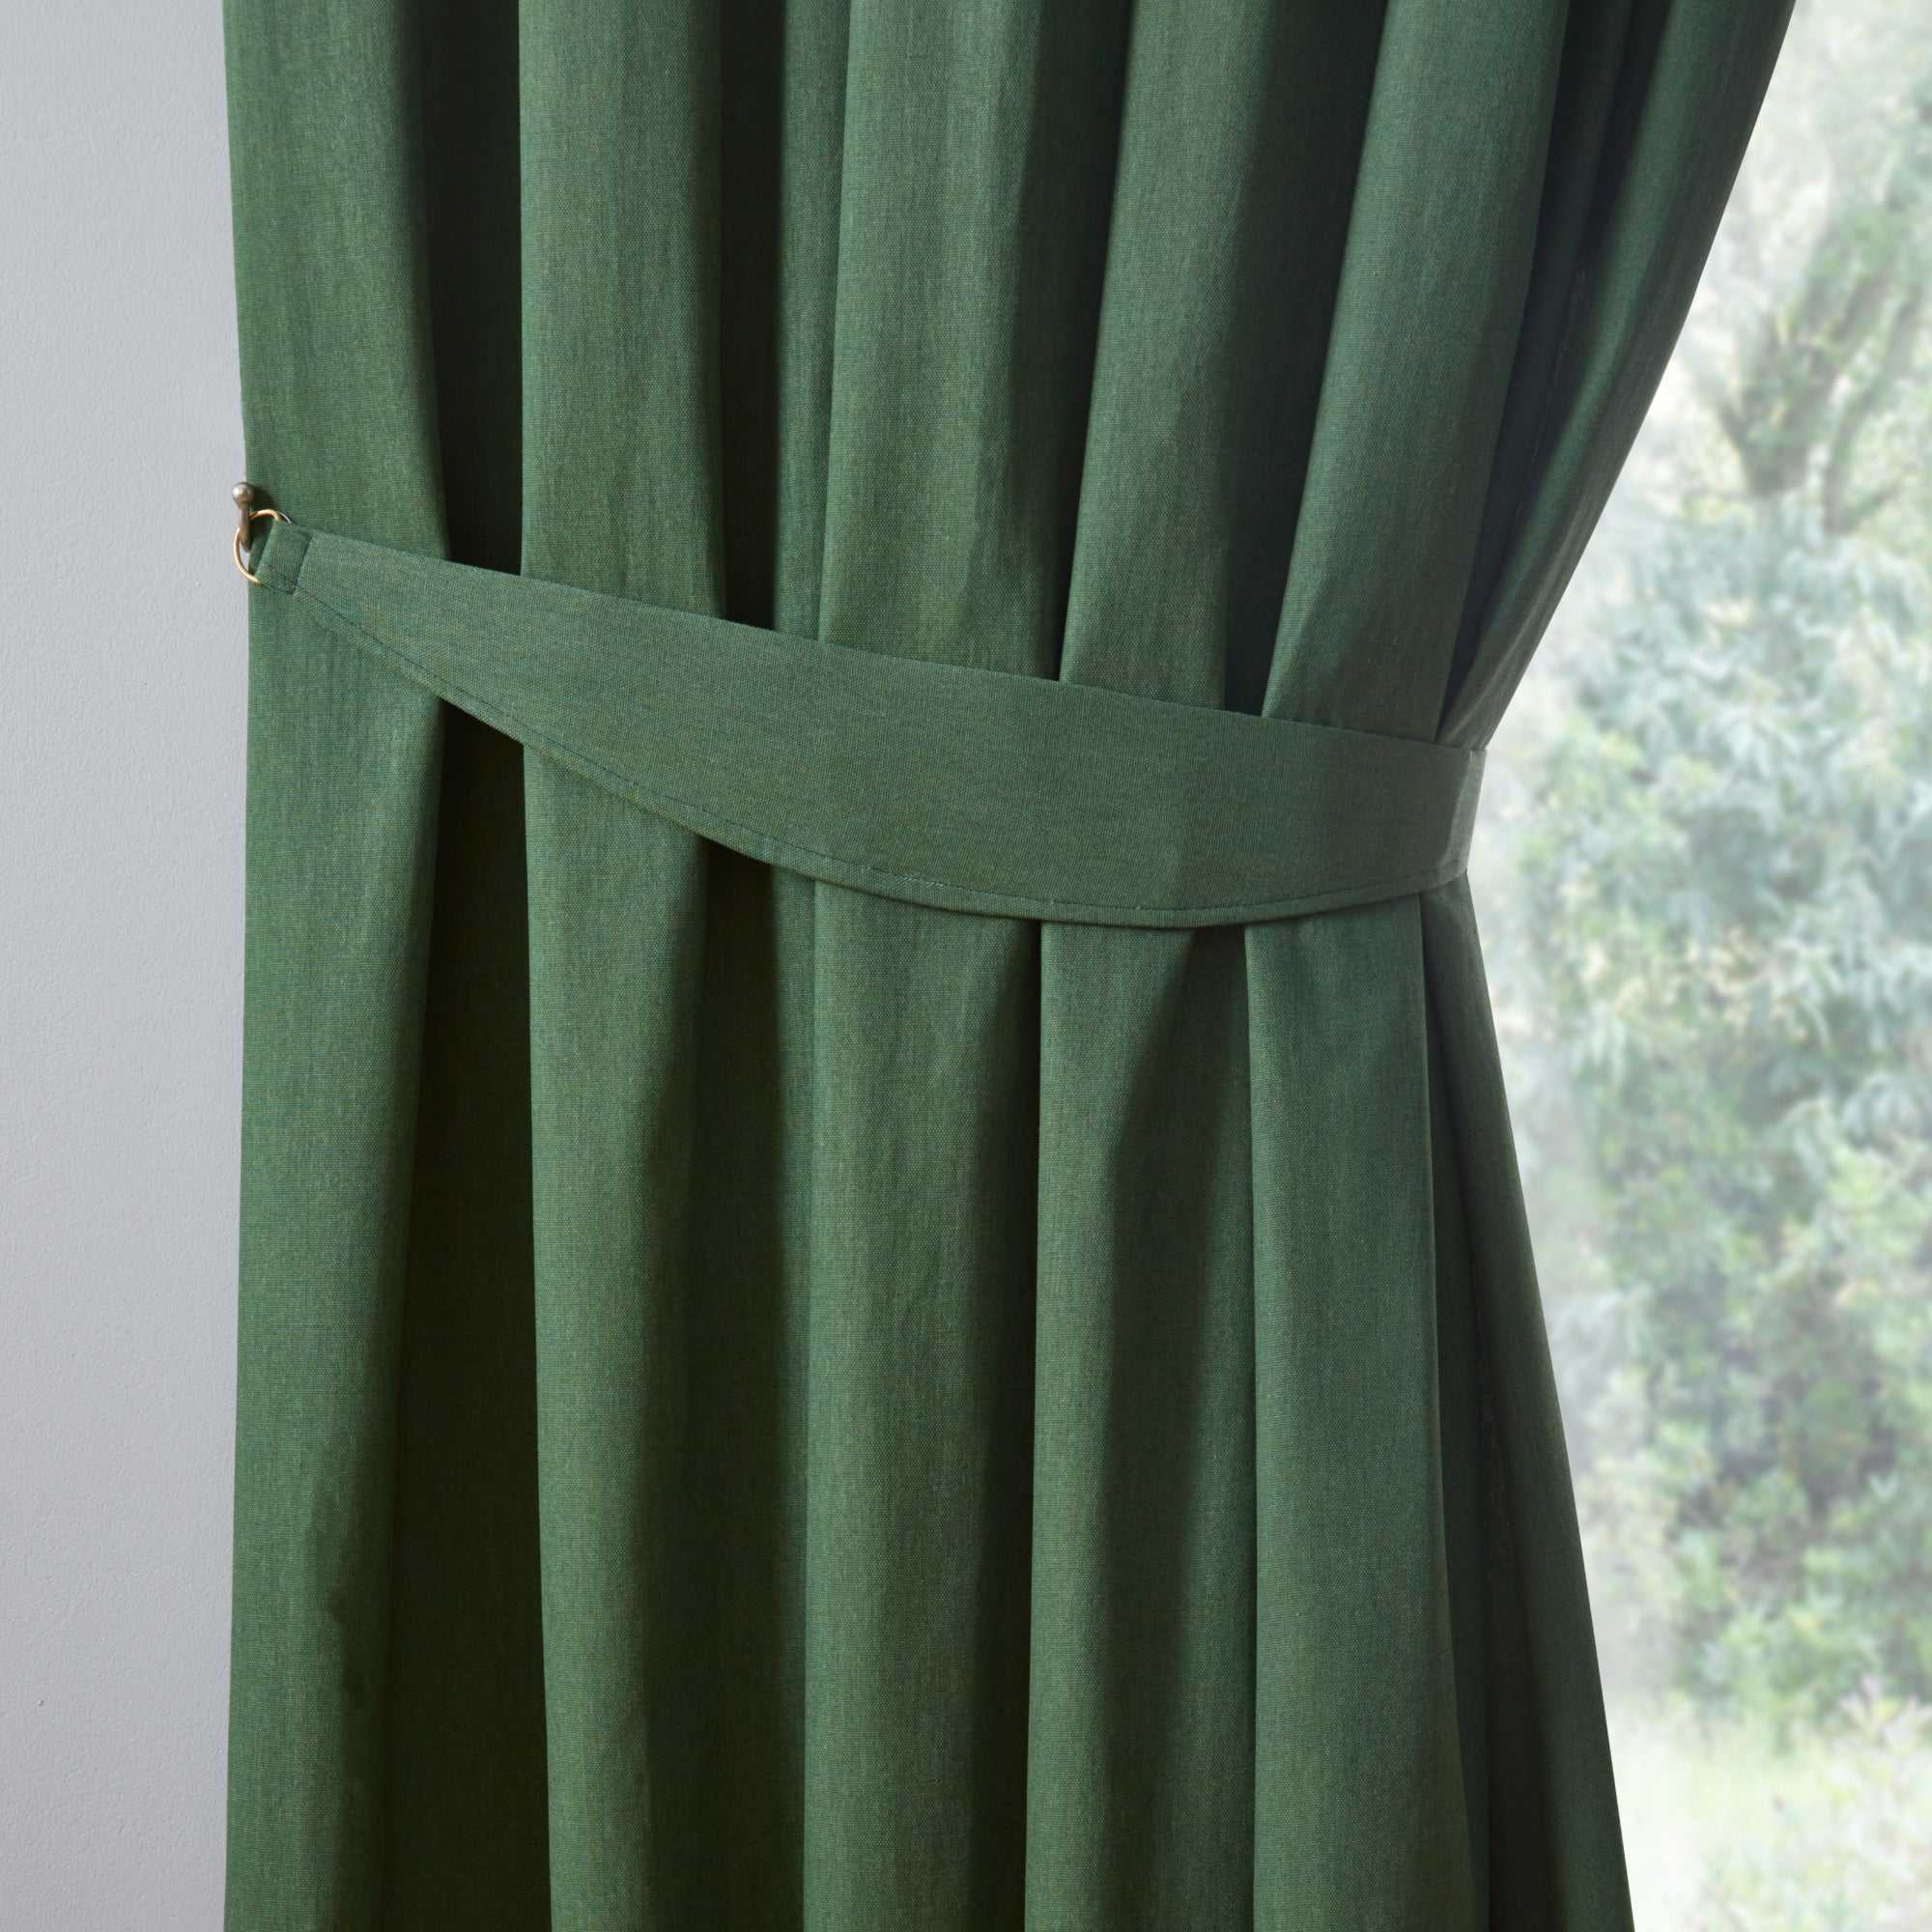 Pair of Curtain Tiebacks Dijon by Fusion in Bottle Green